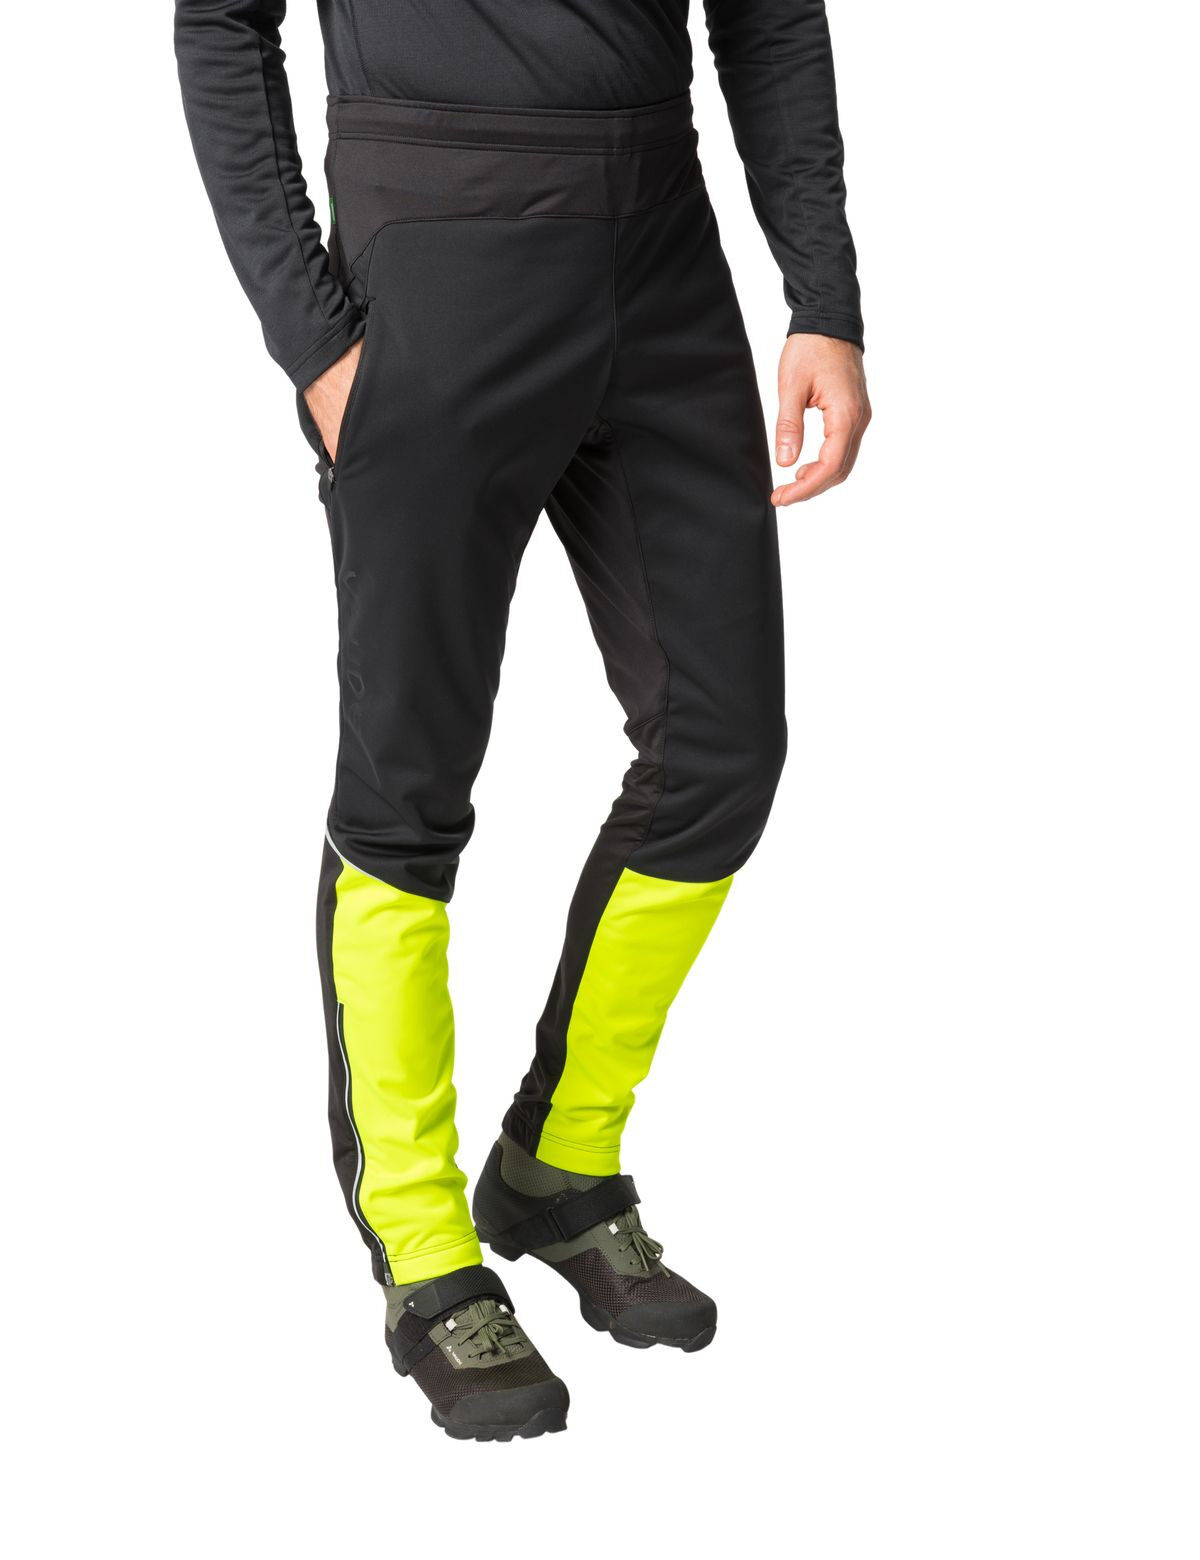 Vaude Wintry Pants V - Cycling trousers - Men's | Hardloop